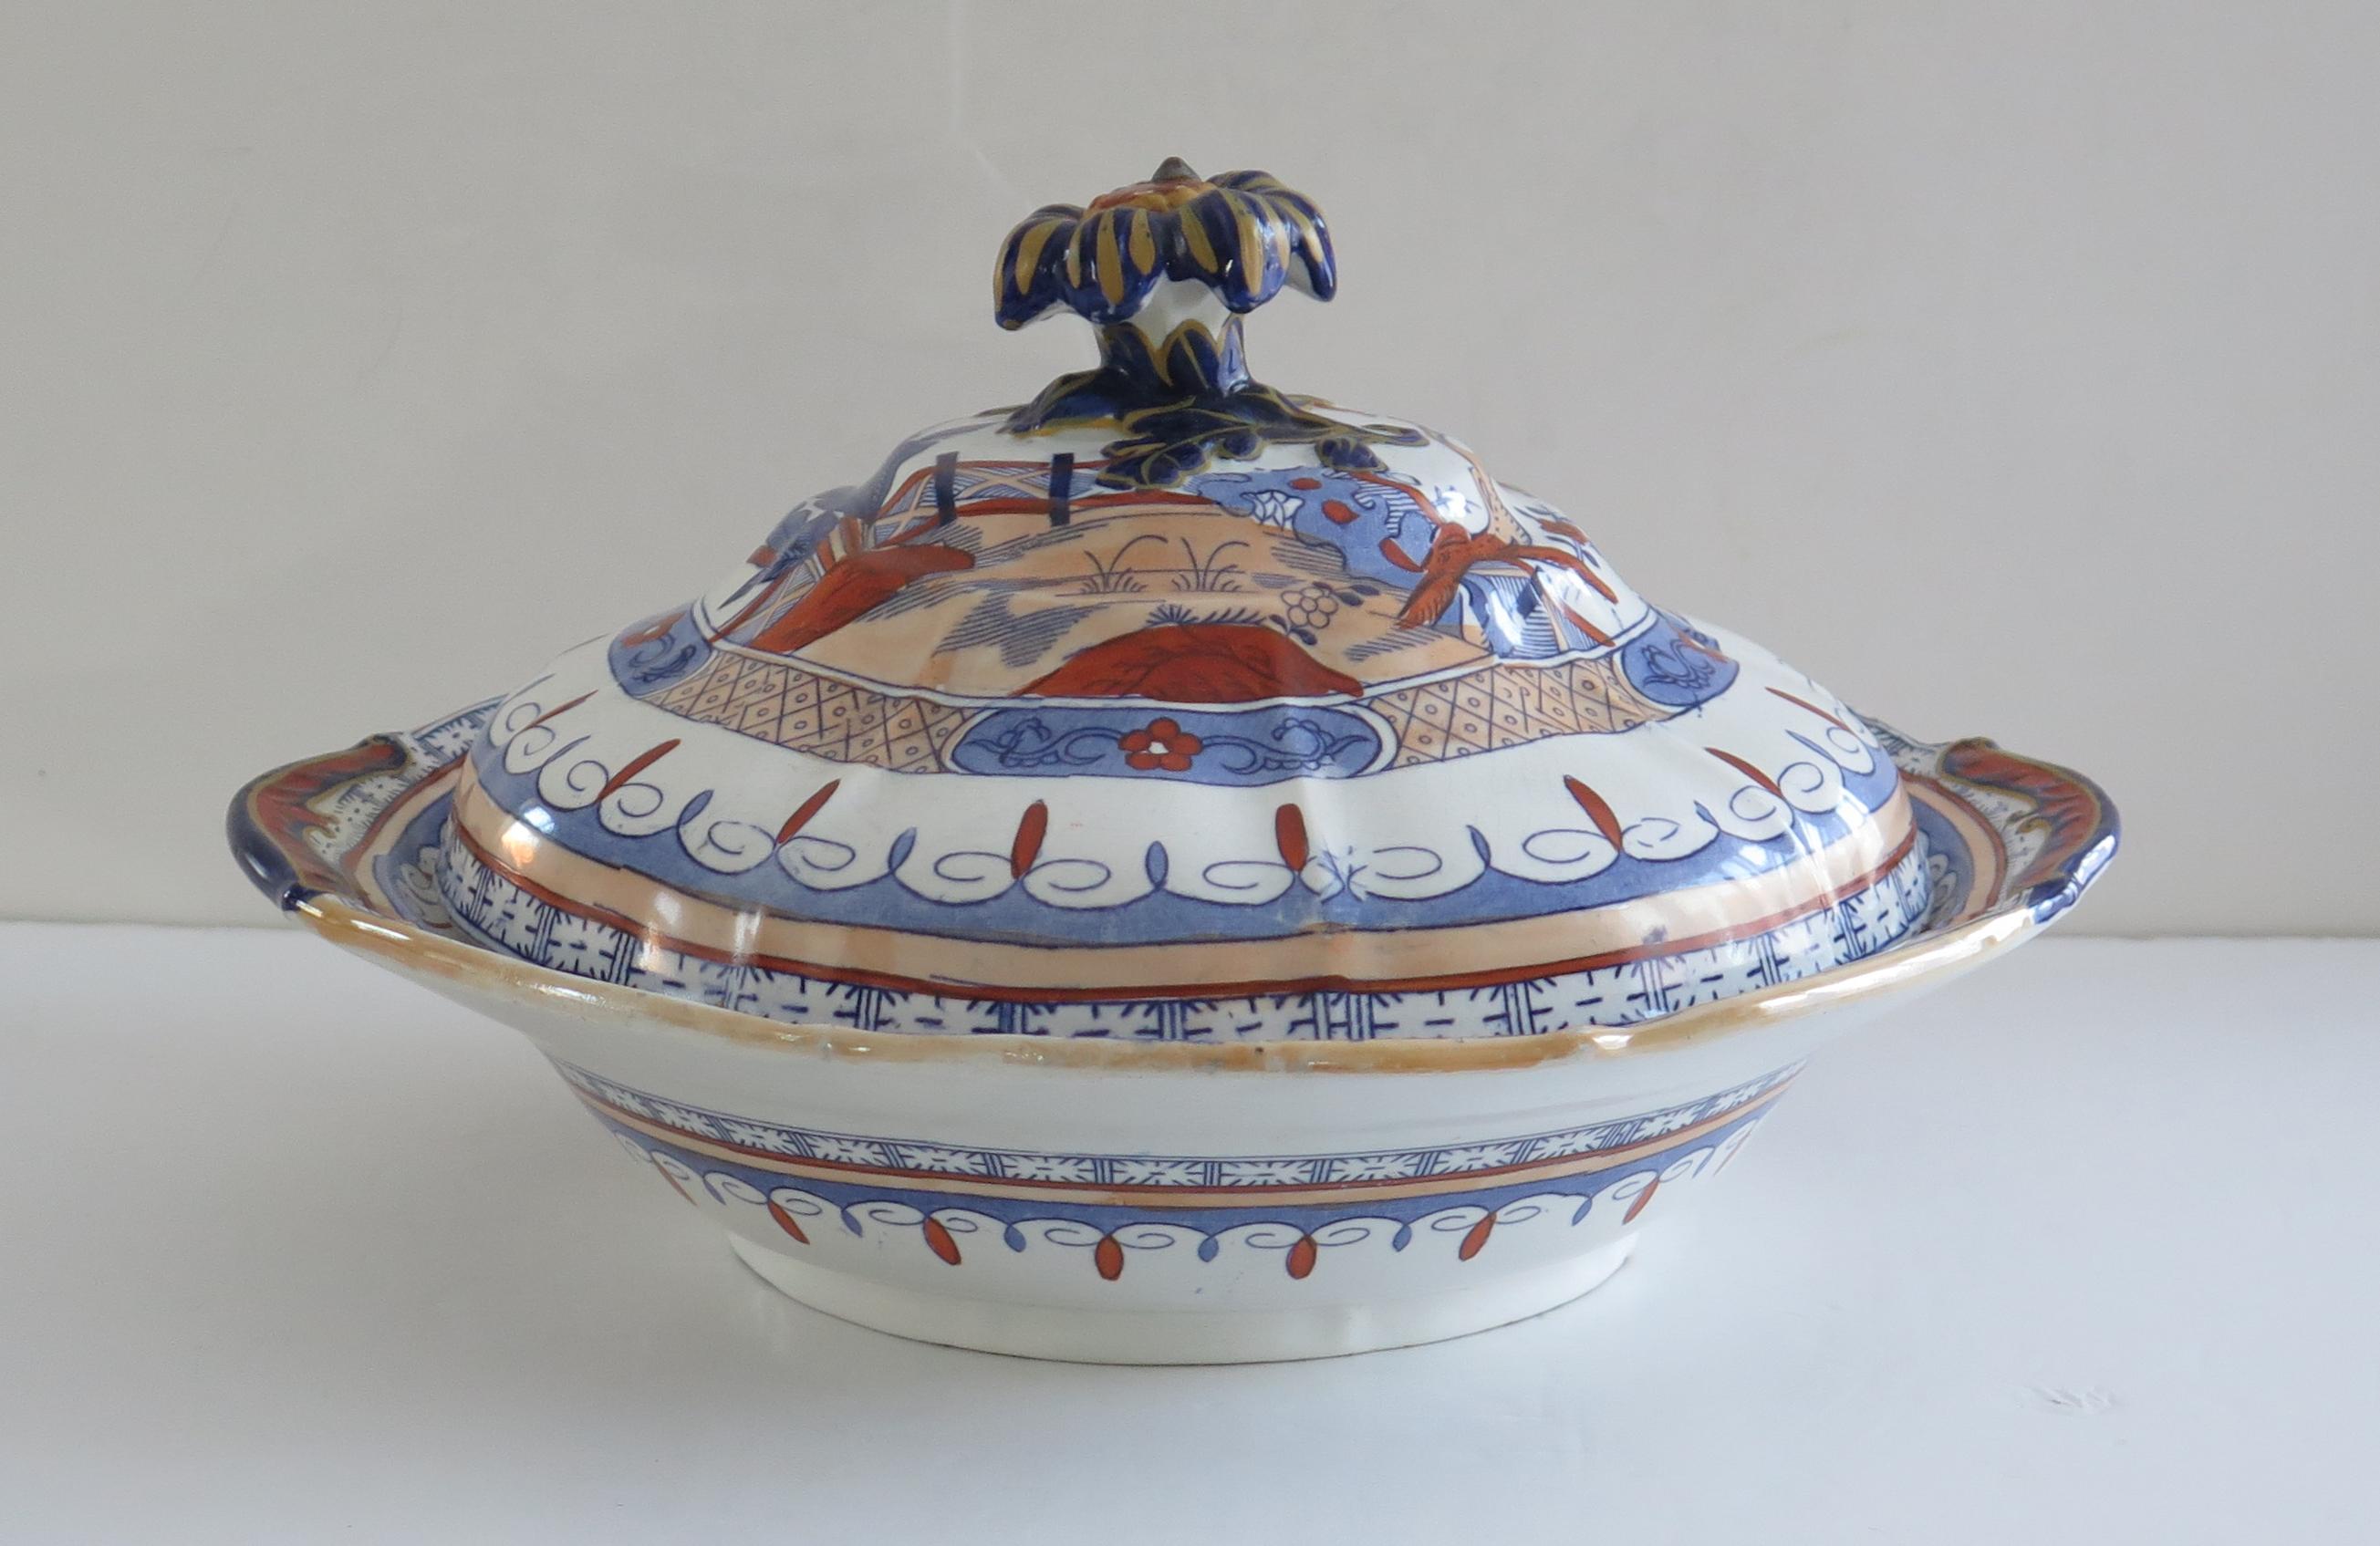 This is an Ironstone Tureen, complete with lid, made by Mason's of Lane Delph, Staffordshire, England, during the early part of the 19th century, circa 1825 to 1840.

This is a rare shape piece in a rare pattern.

This tureen and its lid are